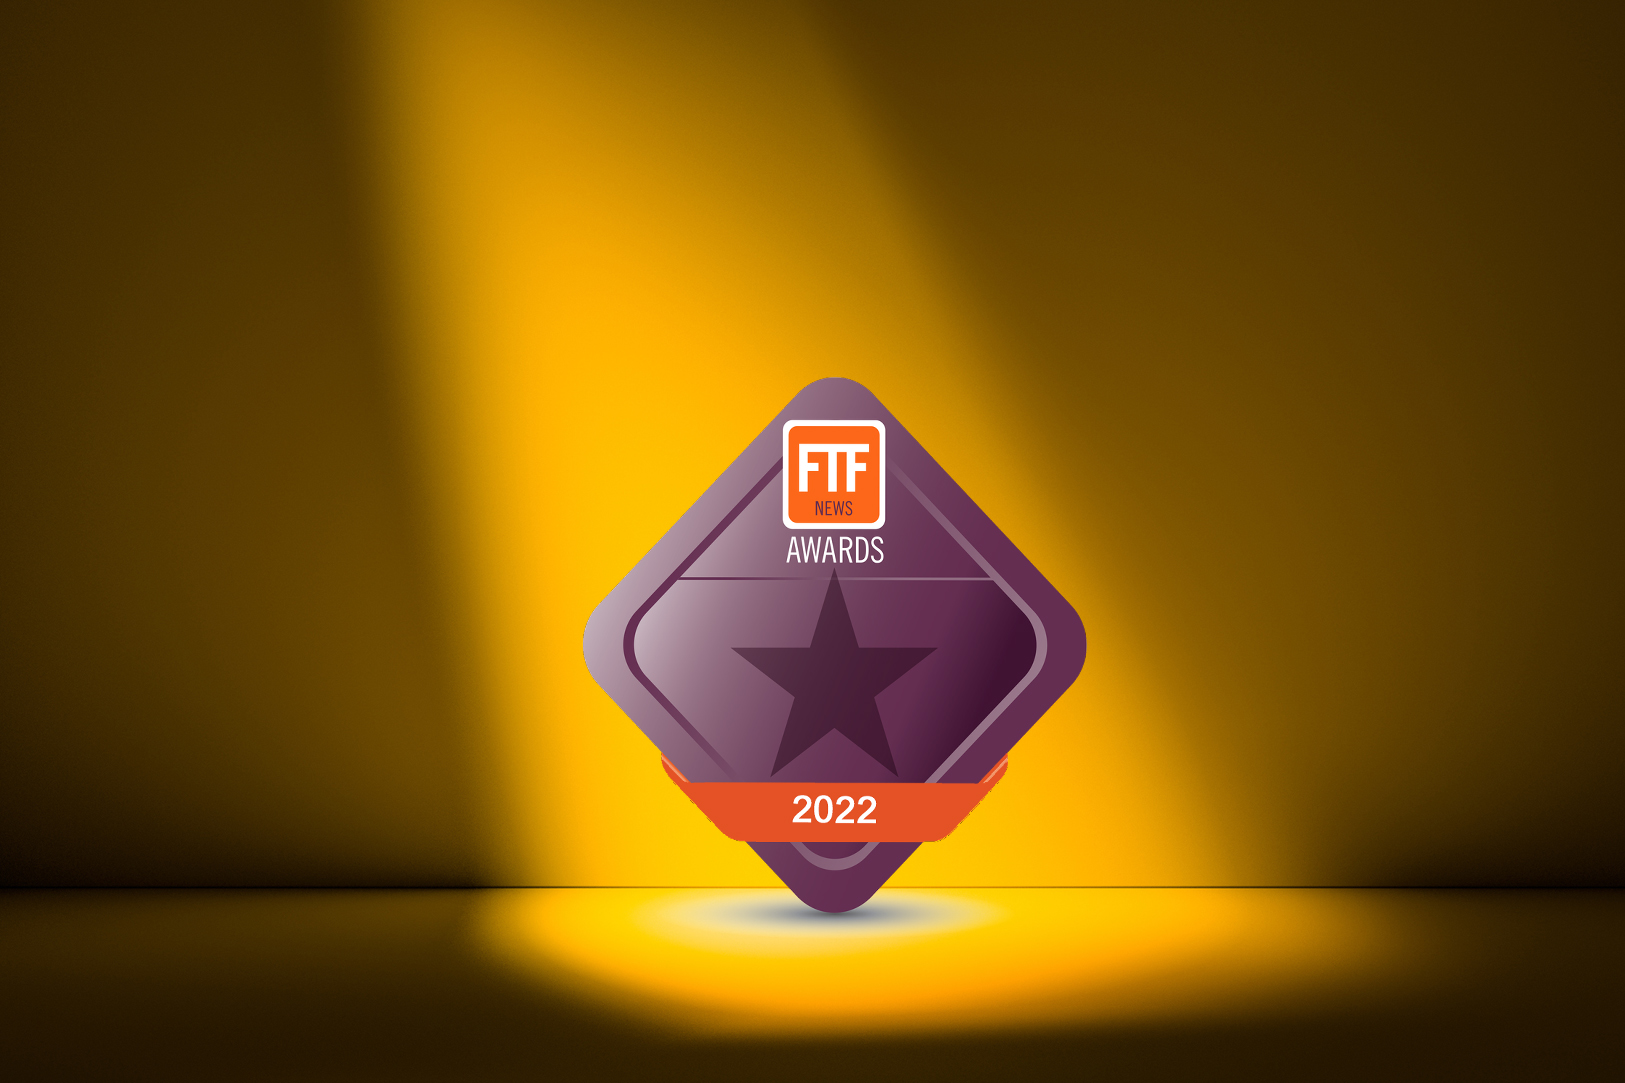 FTF Reveals the Winners of the 2022 FTF Awards